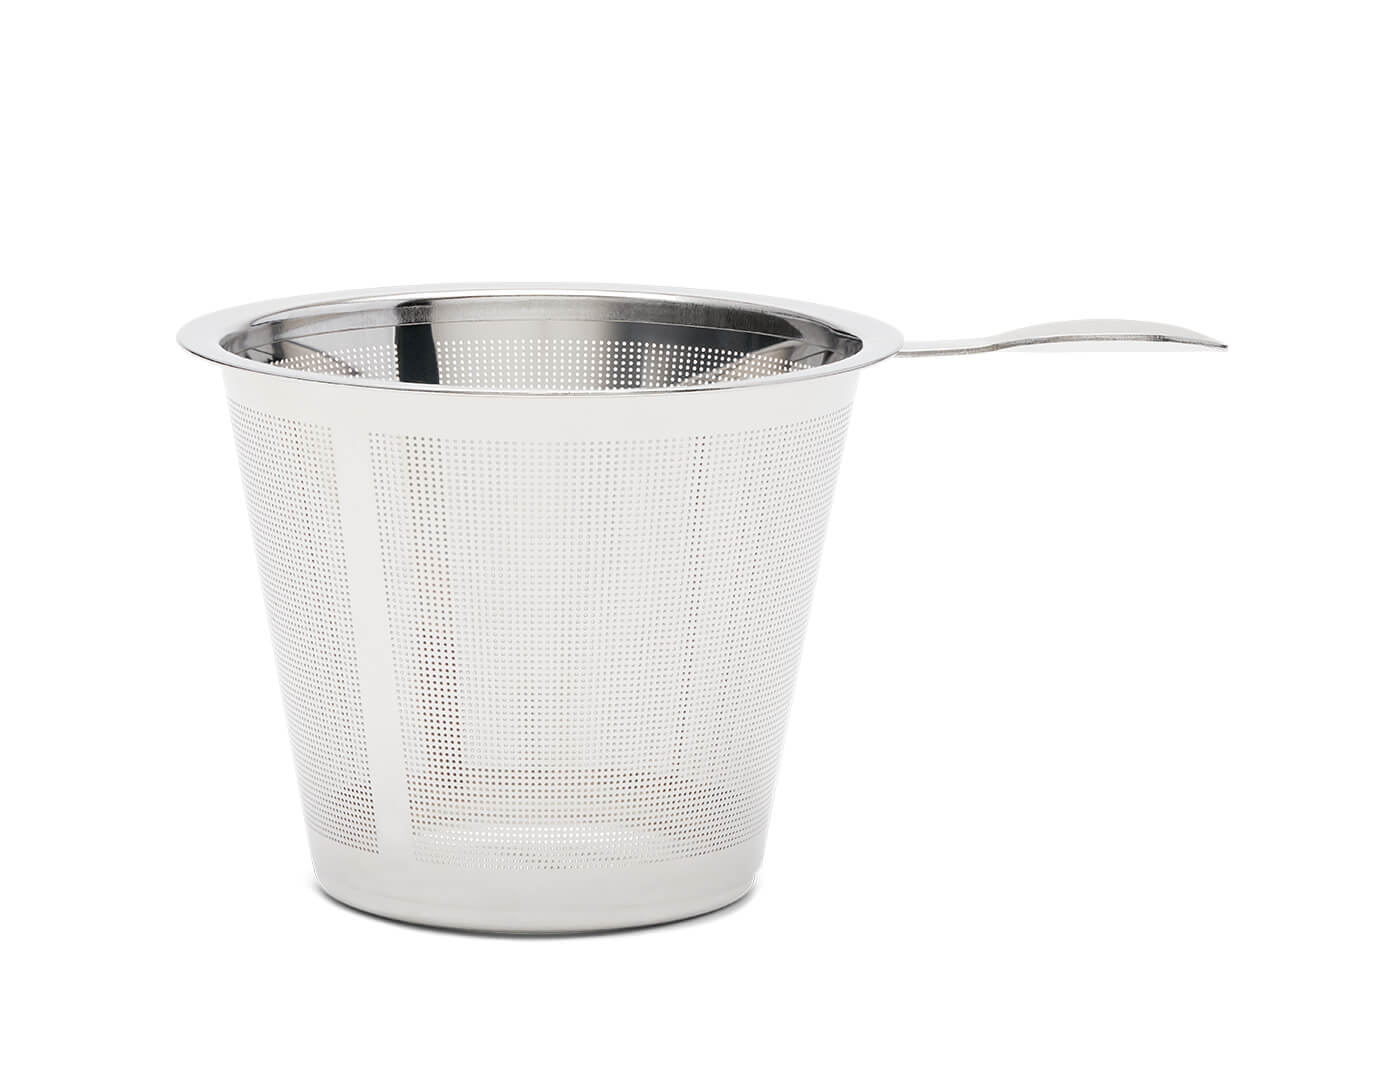 Stainless steel infuser basket for the Fiore Teapot